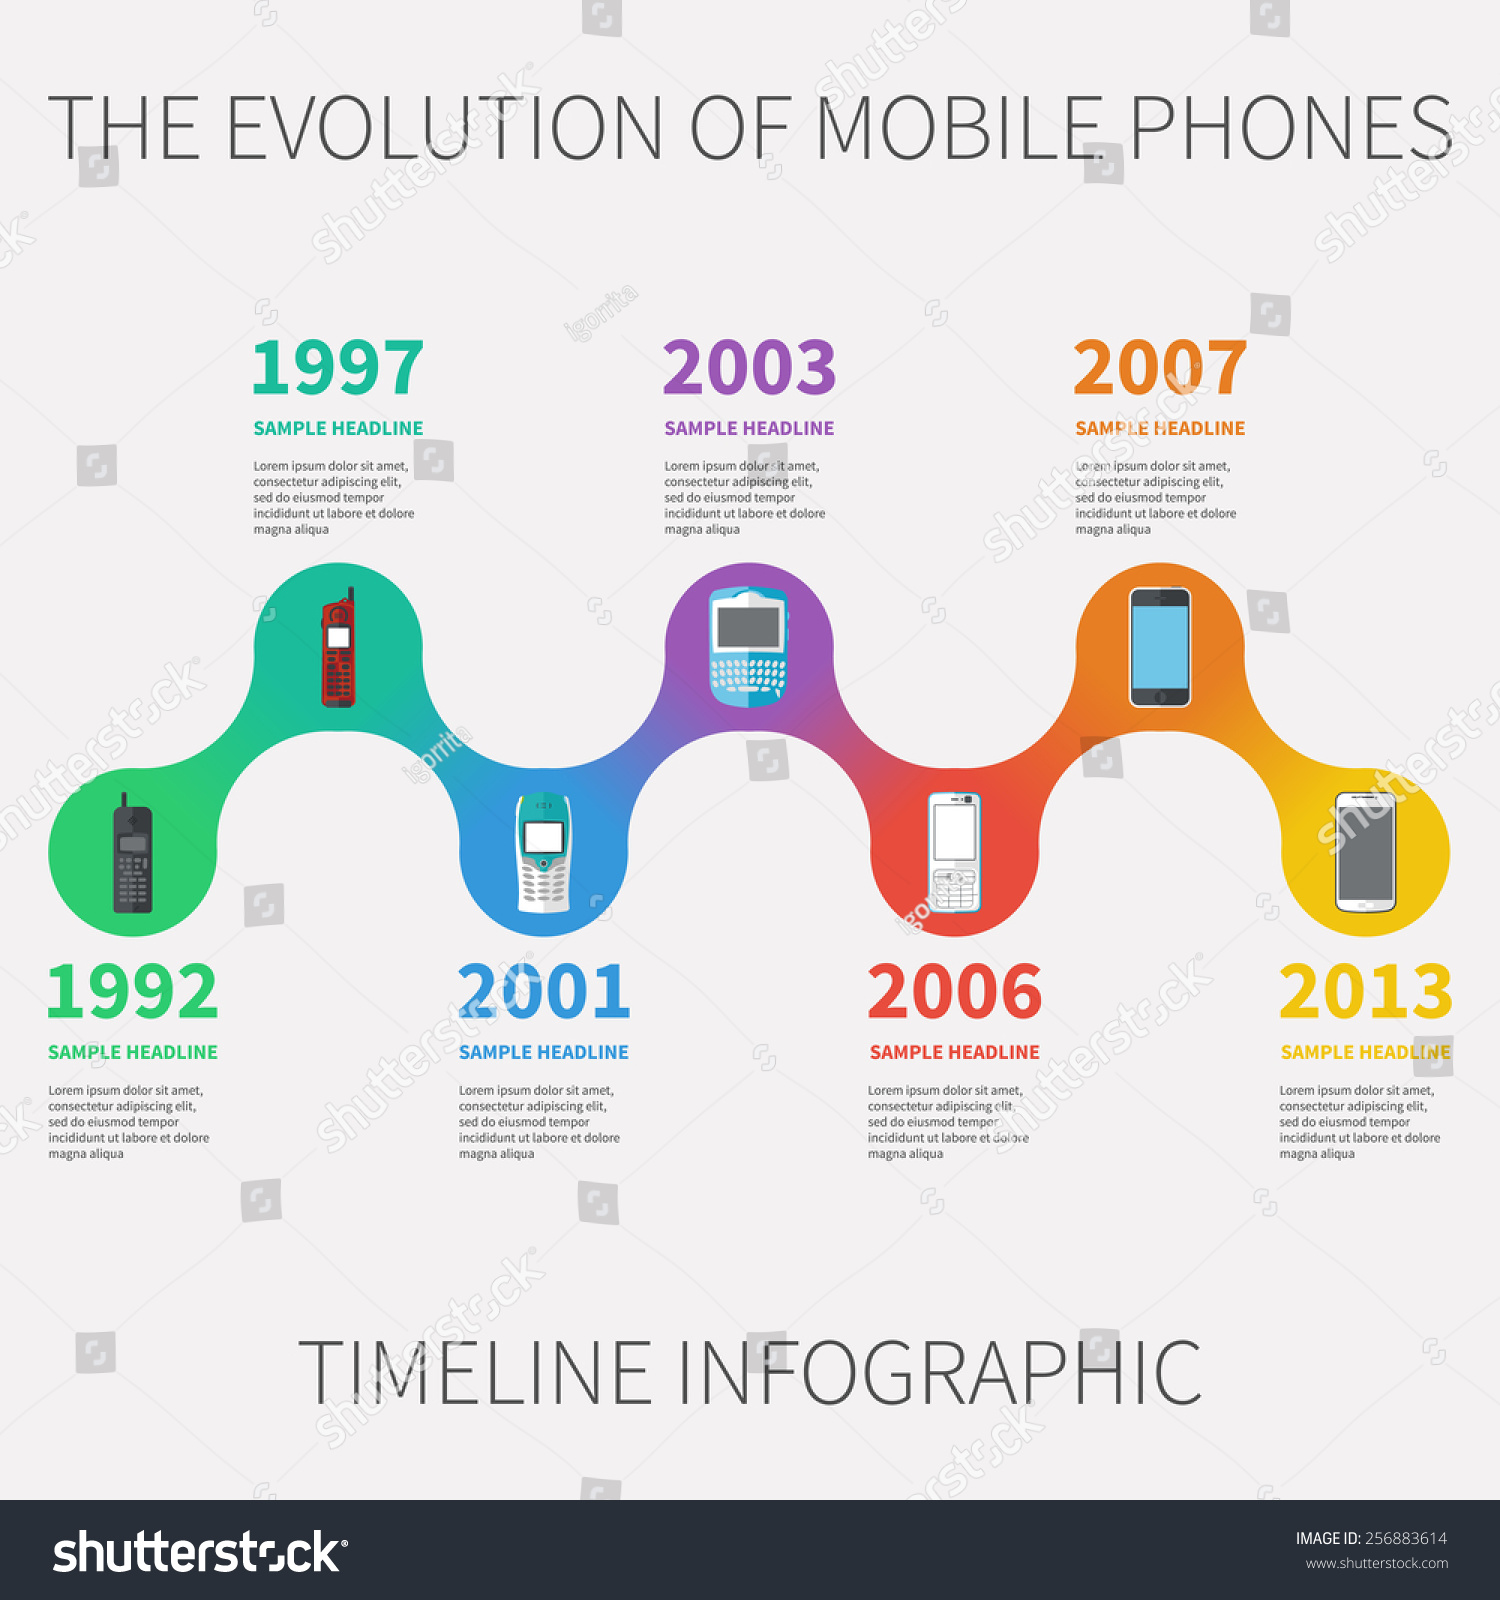 Visual Portrait Of The Evolution Of Mobile Phones Infographic Images 9822